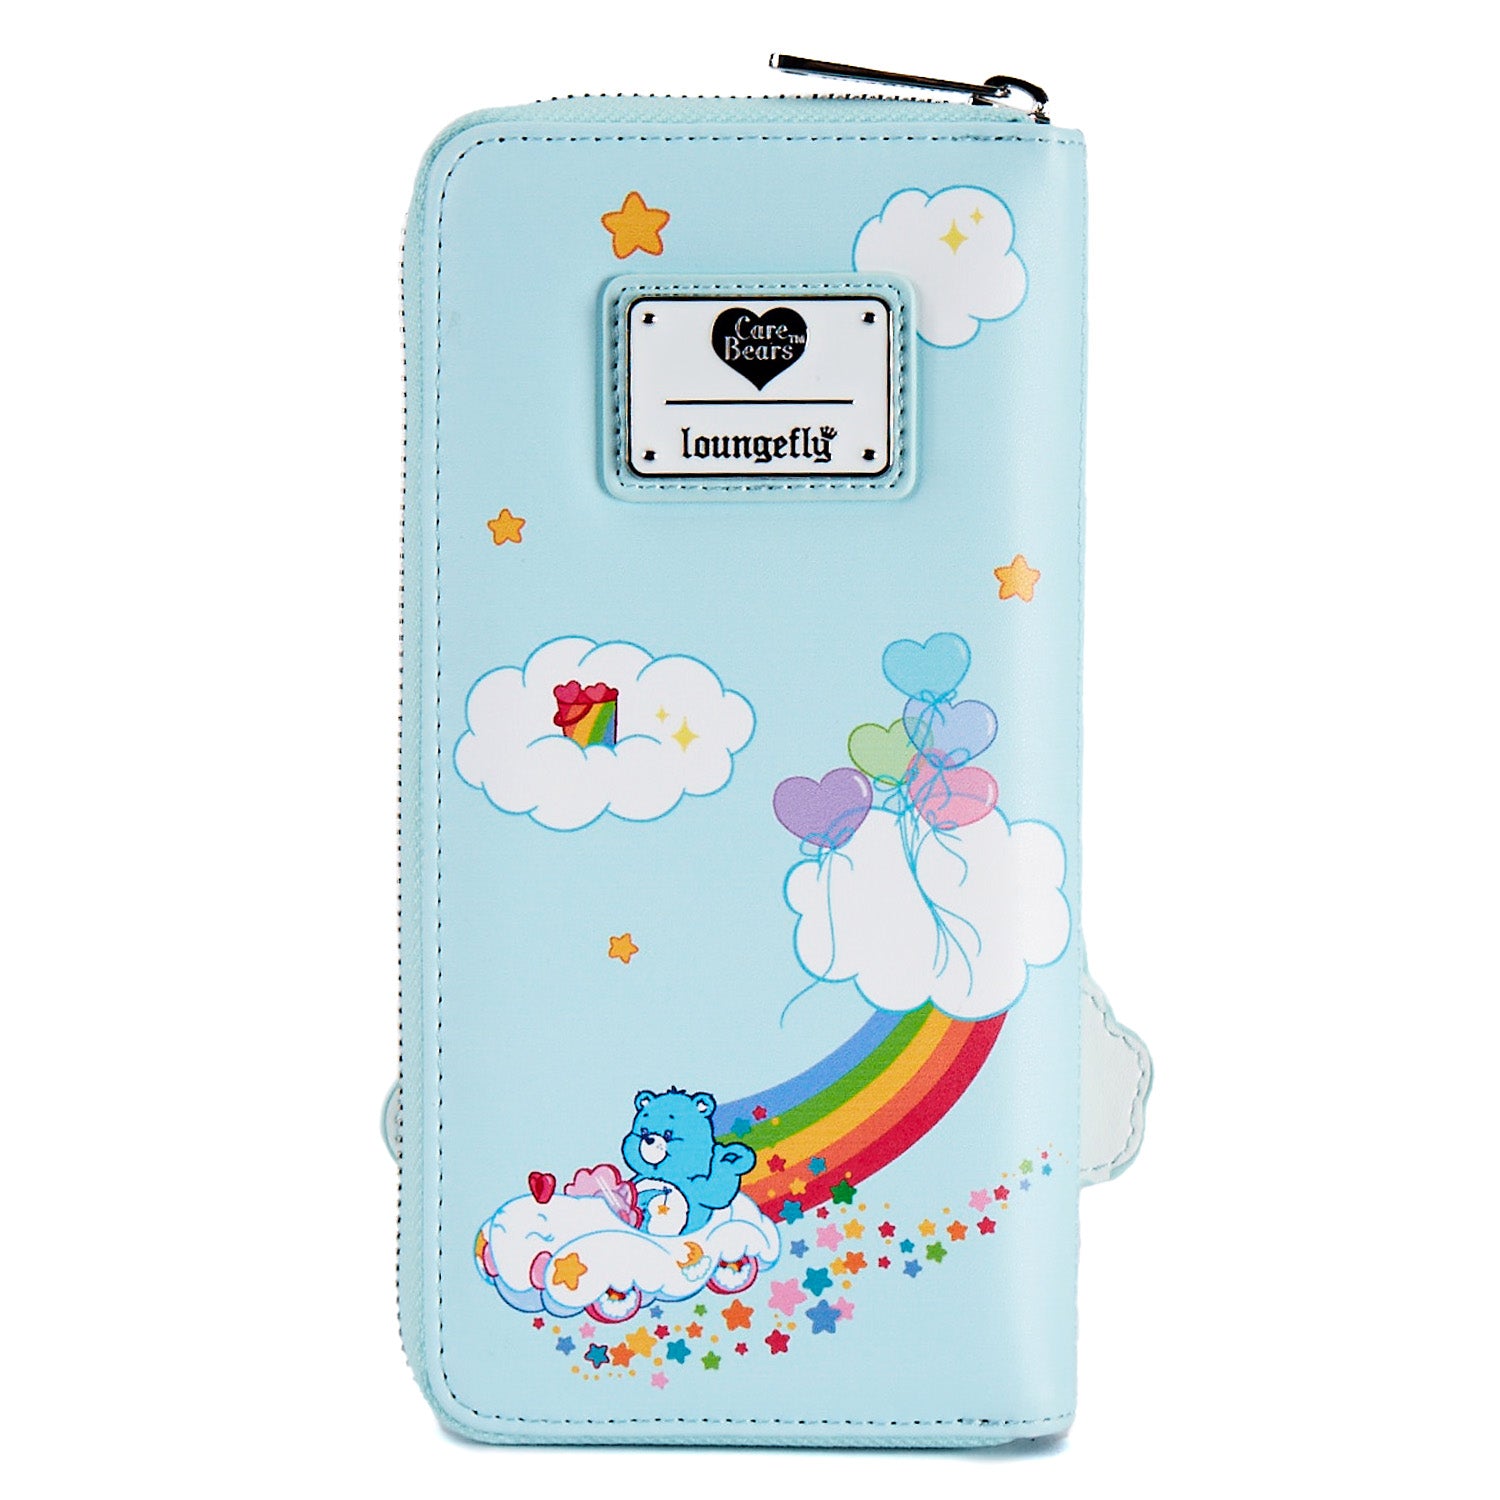 Care Bears | Care-A-Lot Castle Zip Around Wallet